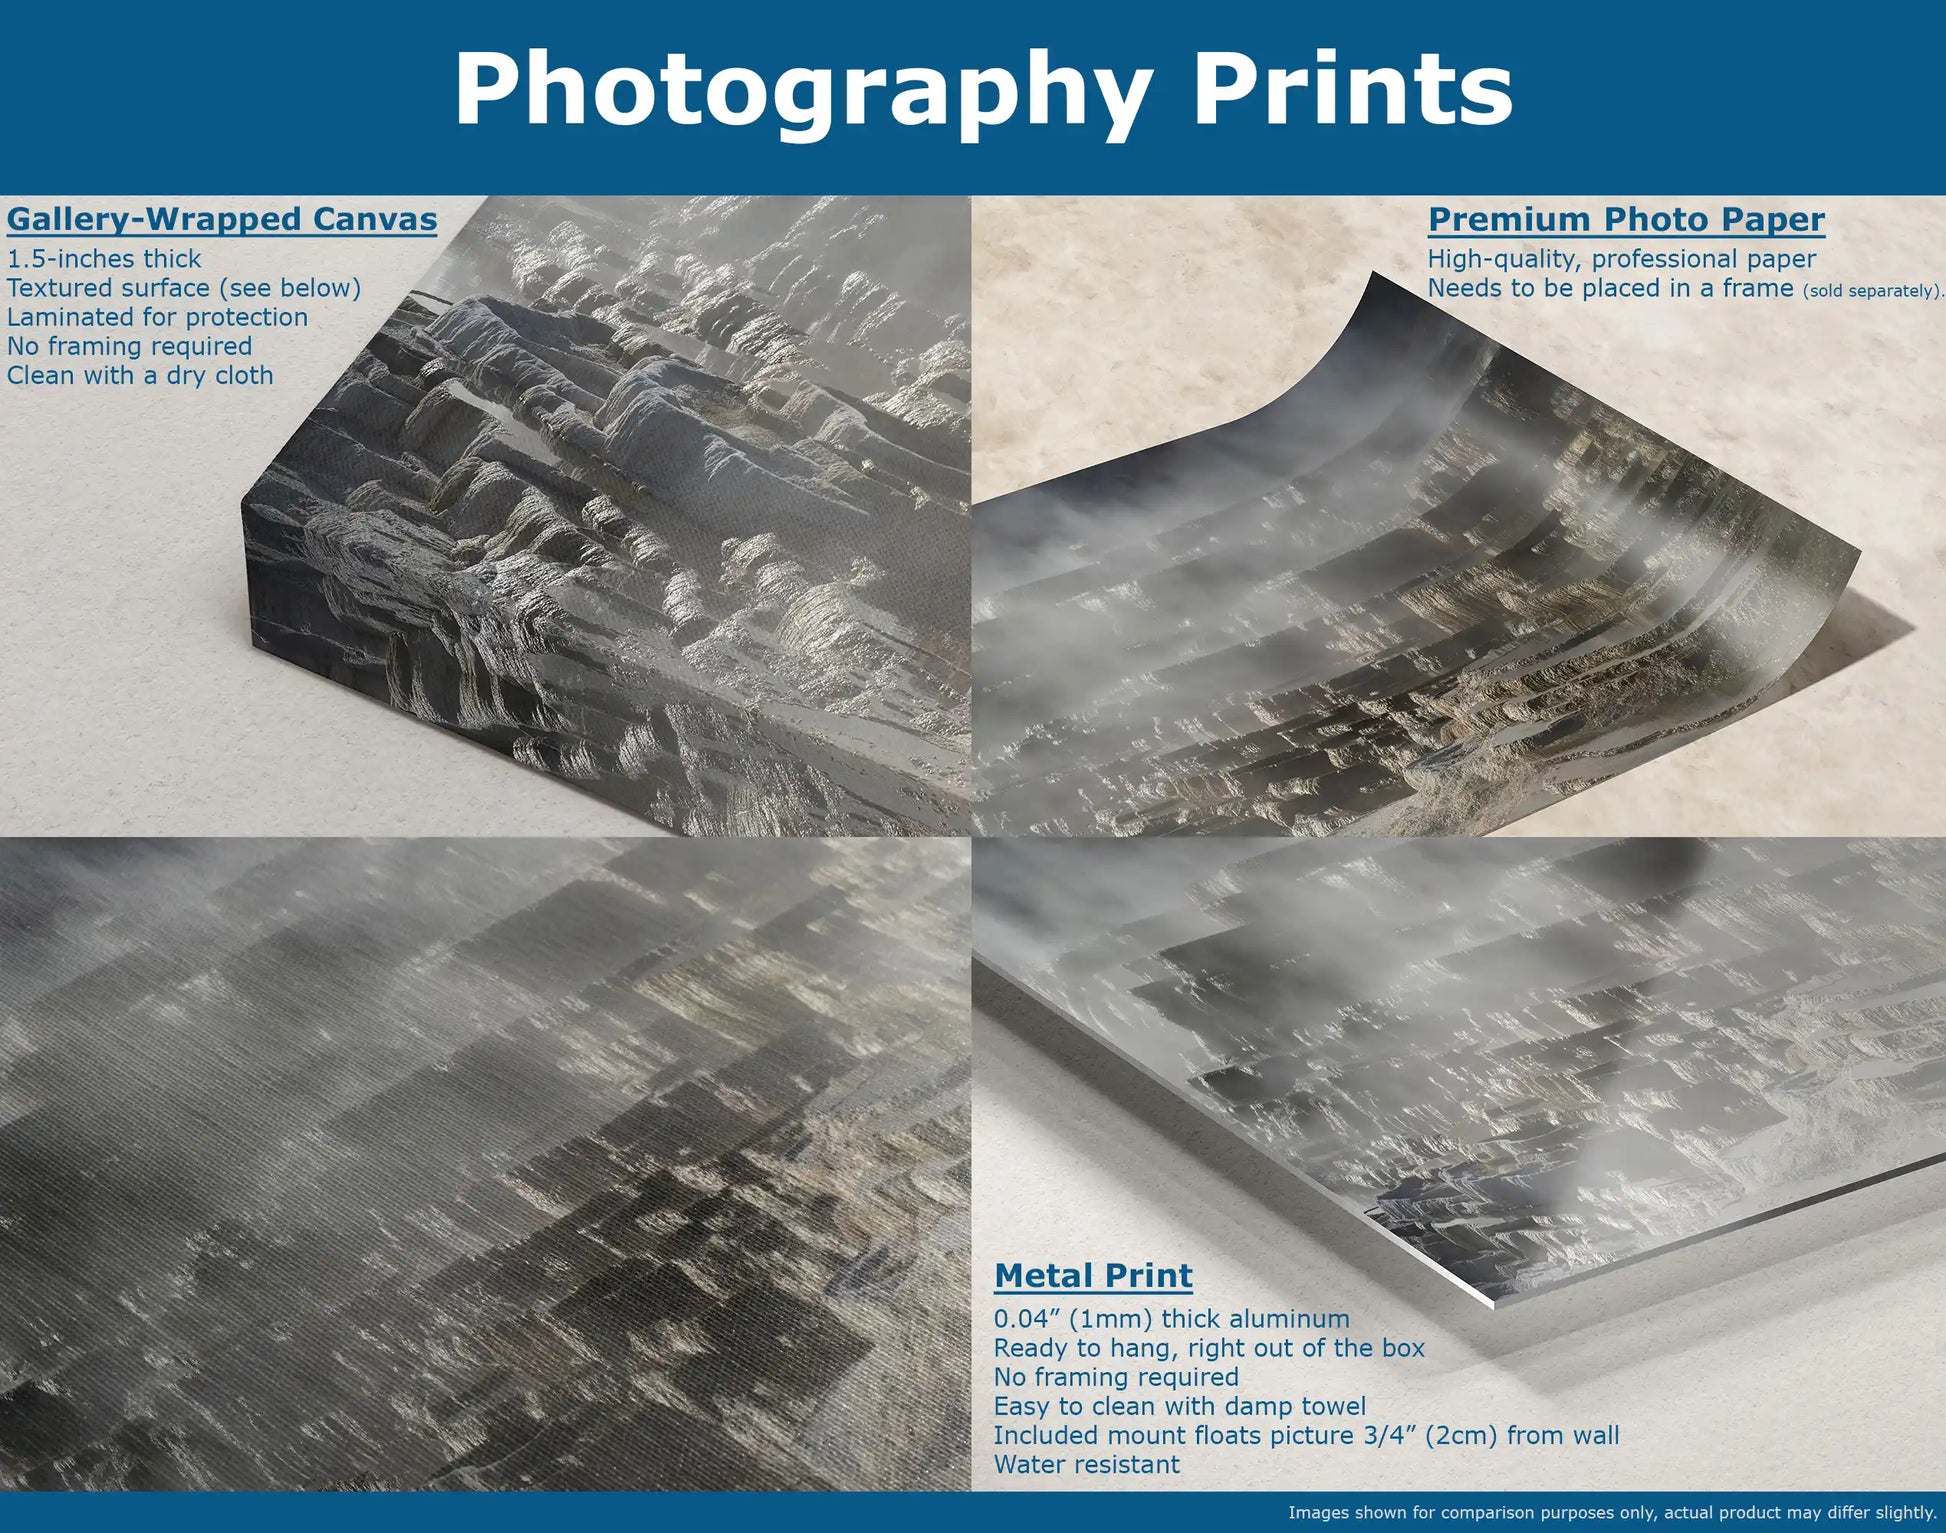 An explainer image comparing gallery-wrapped canvas, premium photo paper, and metal print mediums of a photograph of the Mammoth Hot Springs Terraces